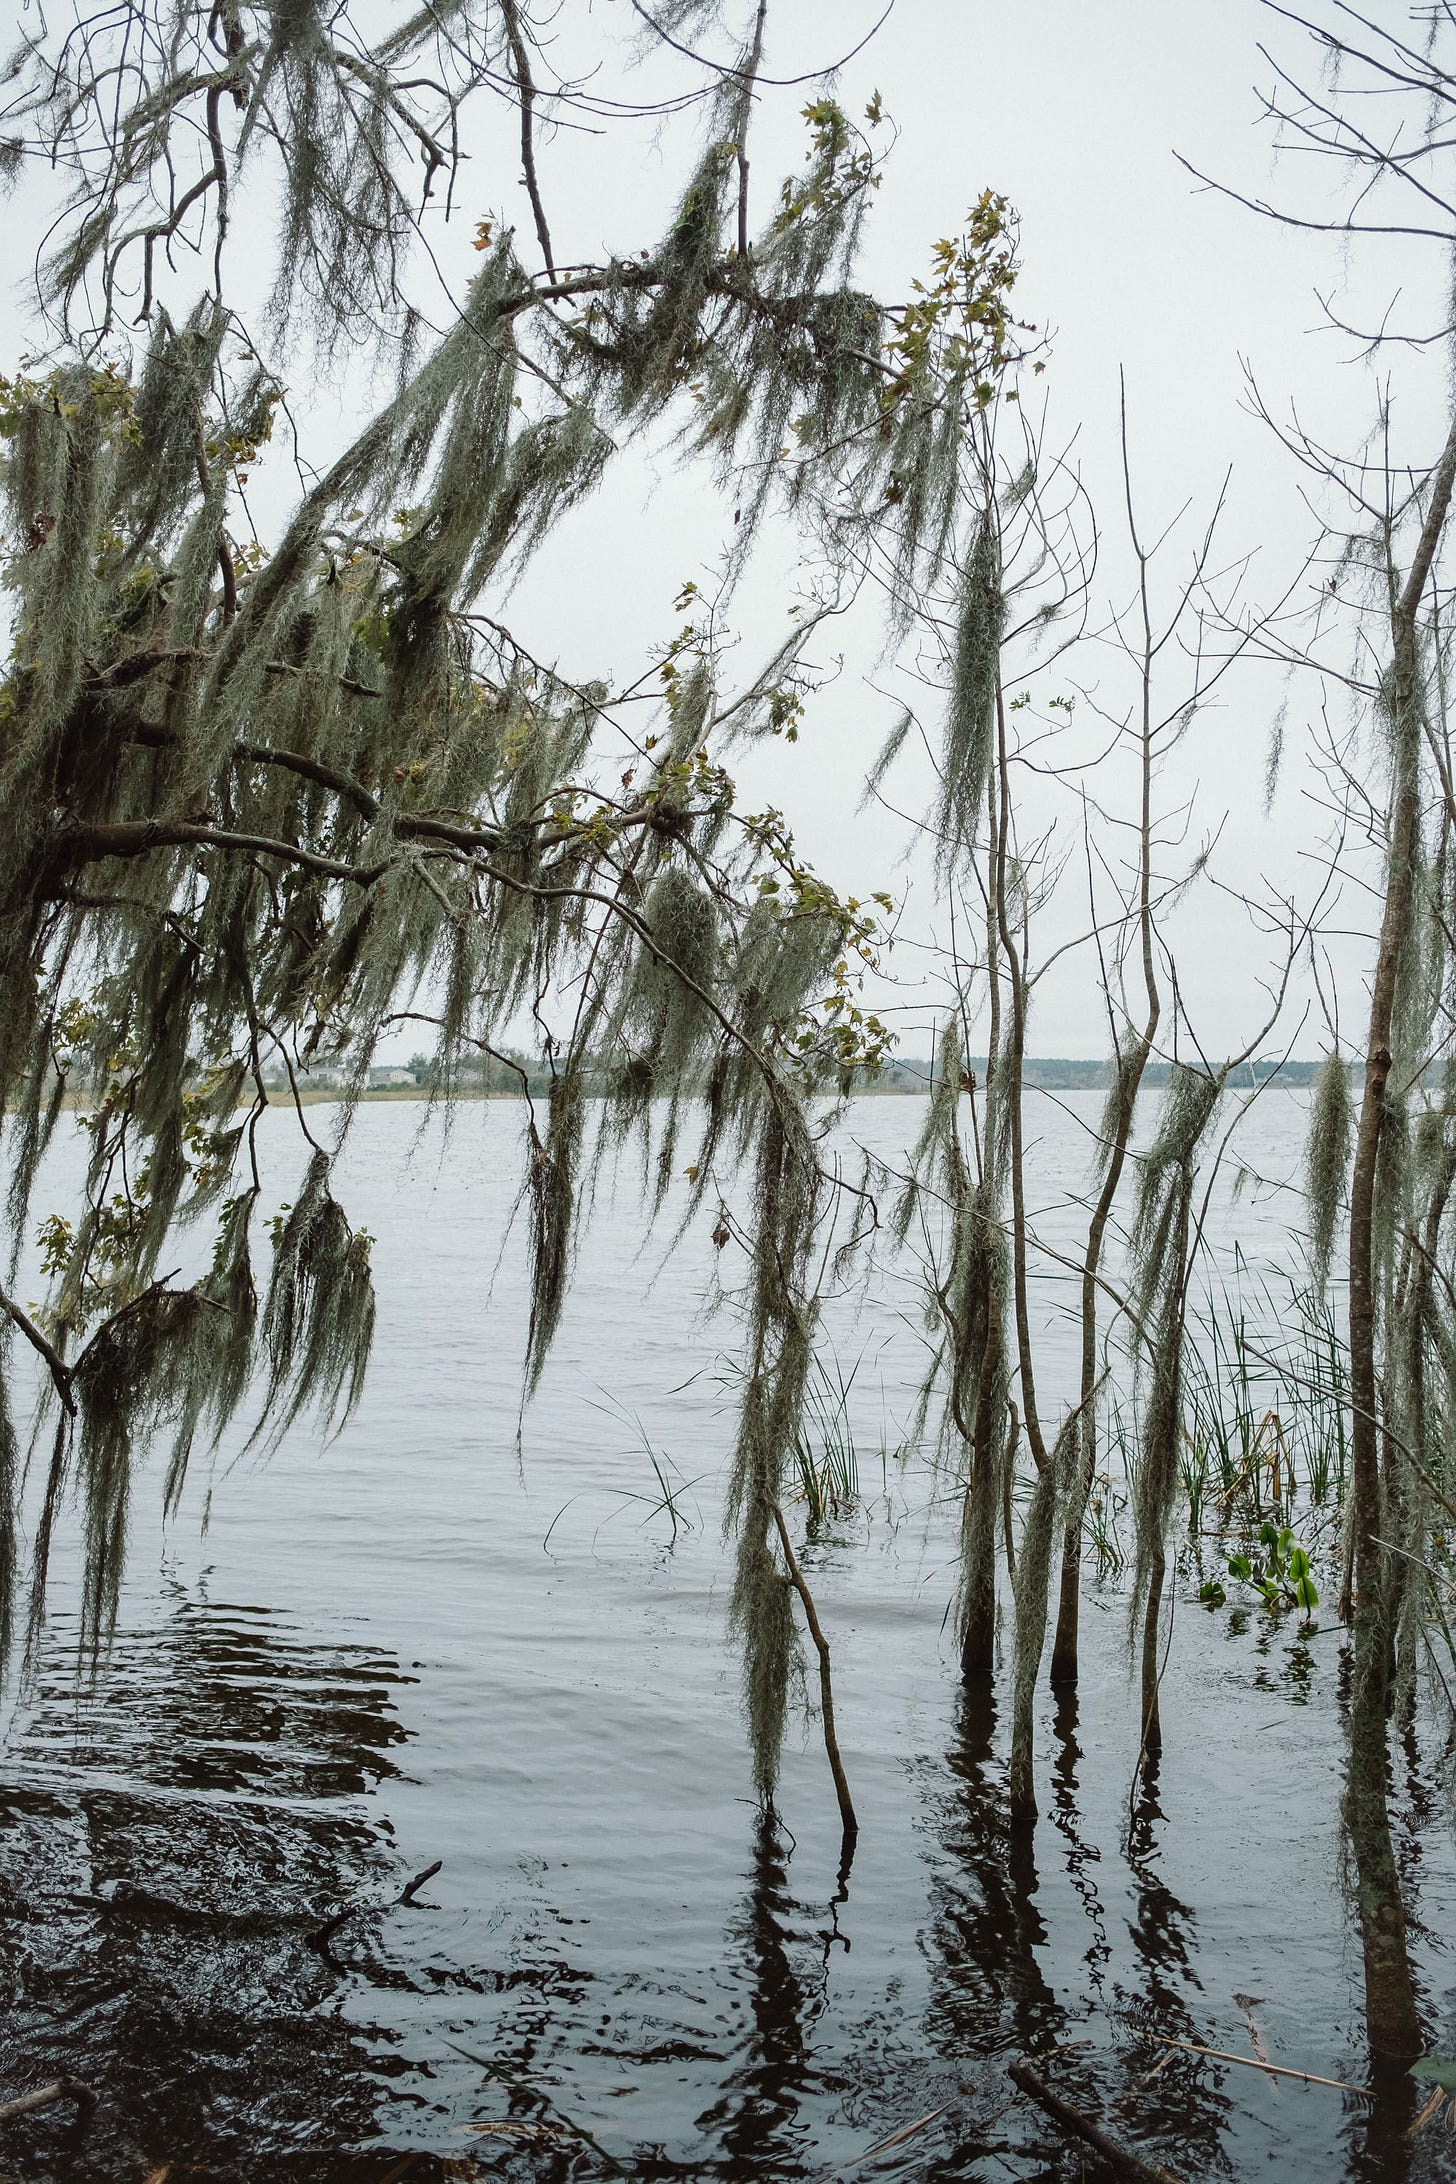 The view of Lake Apopka in Florida on a cloudy day. Seen through a thin curtain of Spanish moss that hangs from the trees.